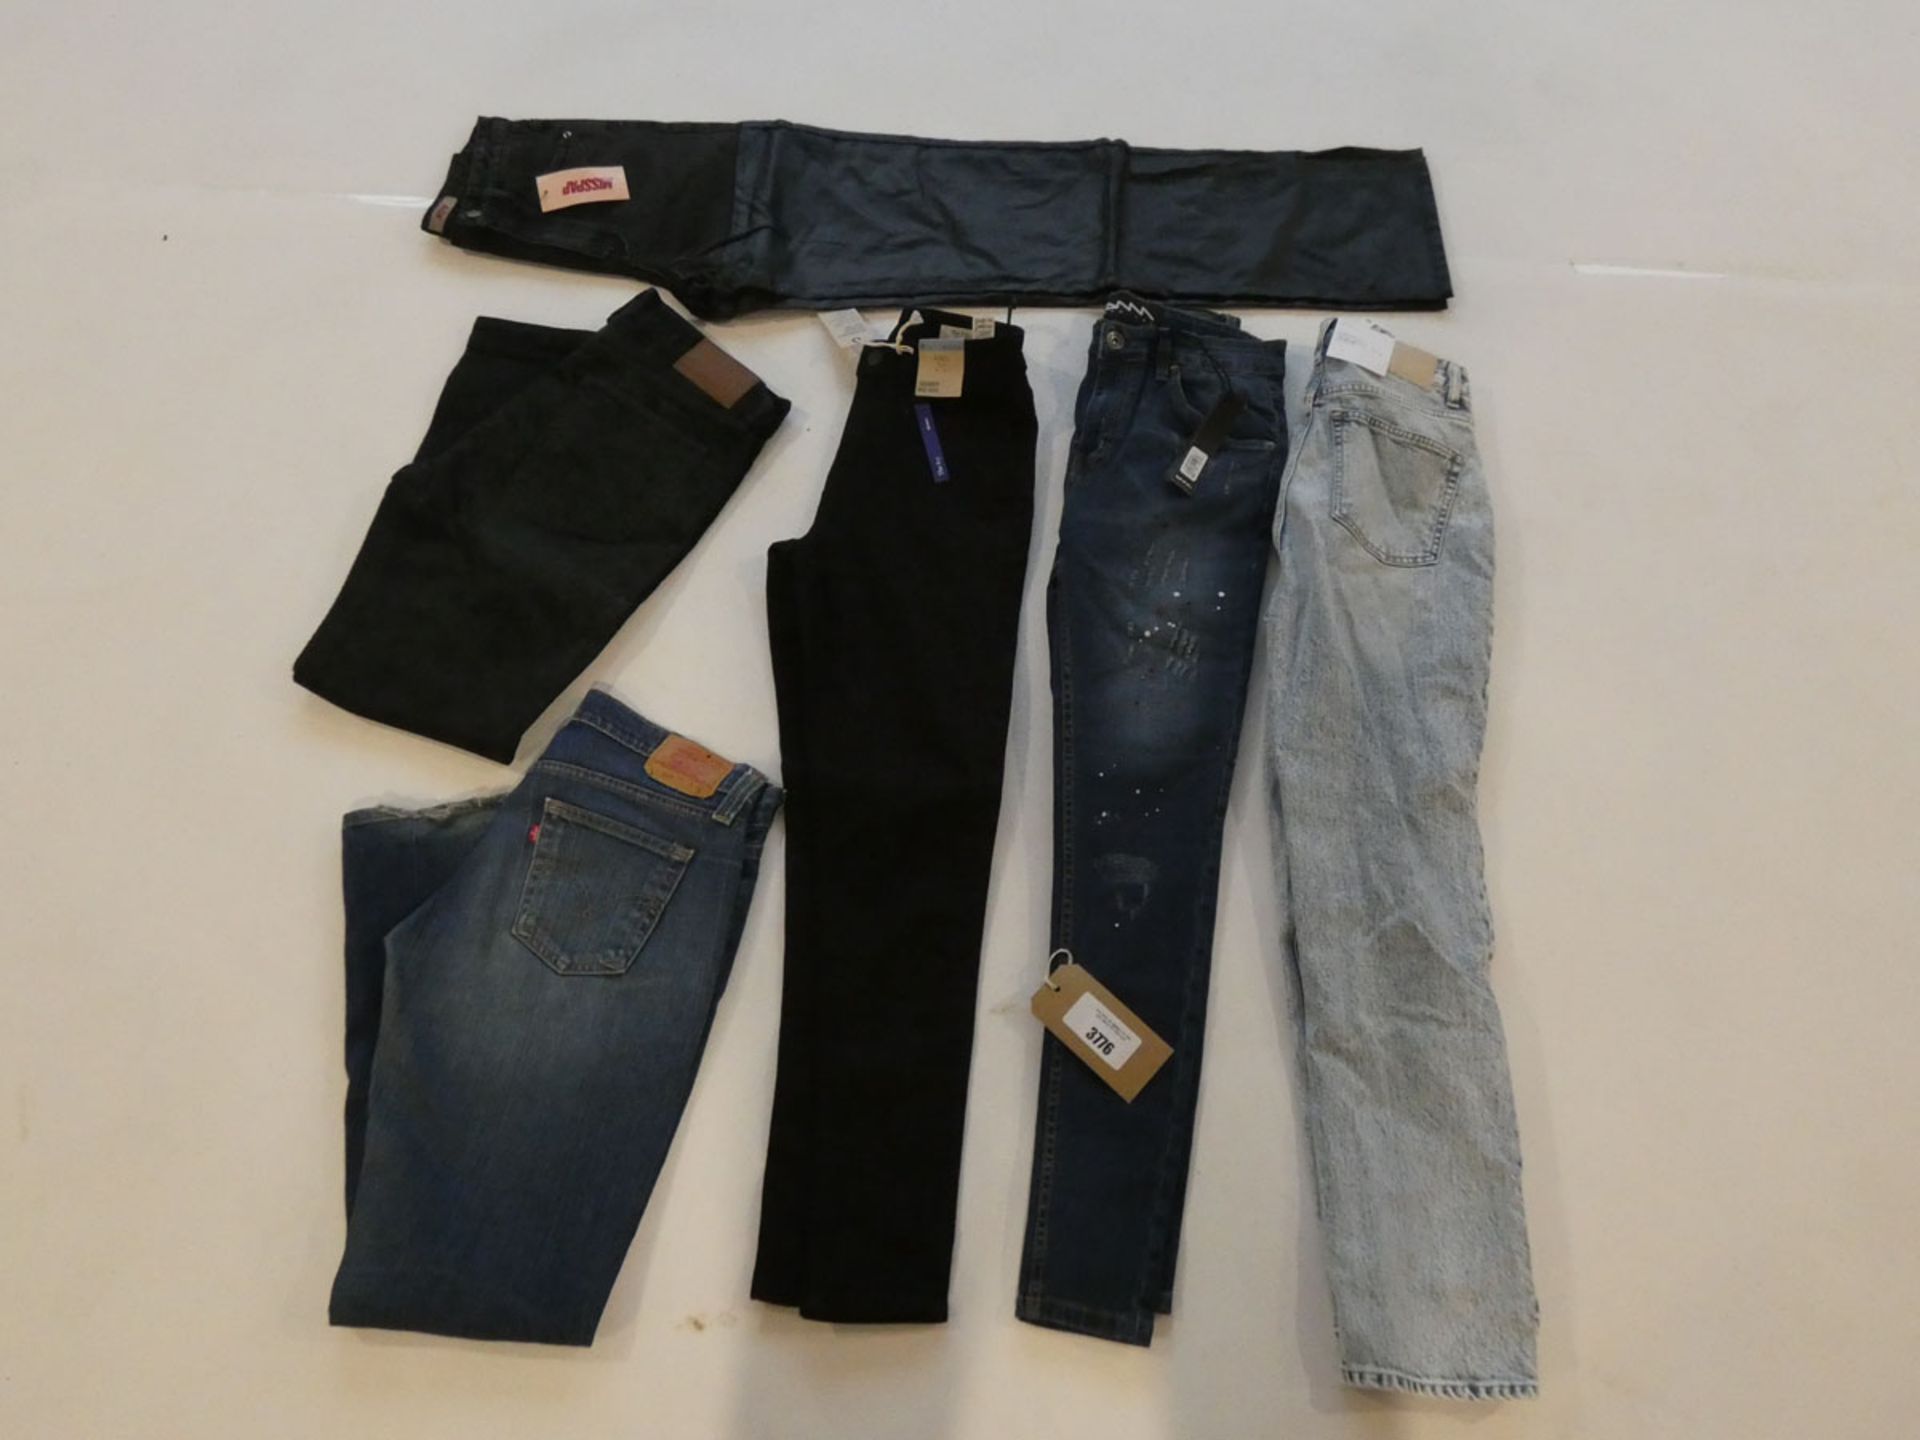 Large selection of denim wear to include Gap, Mispap, Levis, etc in various sizes